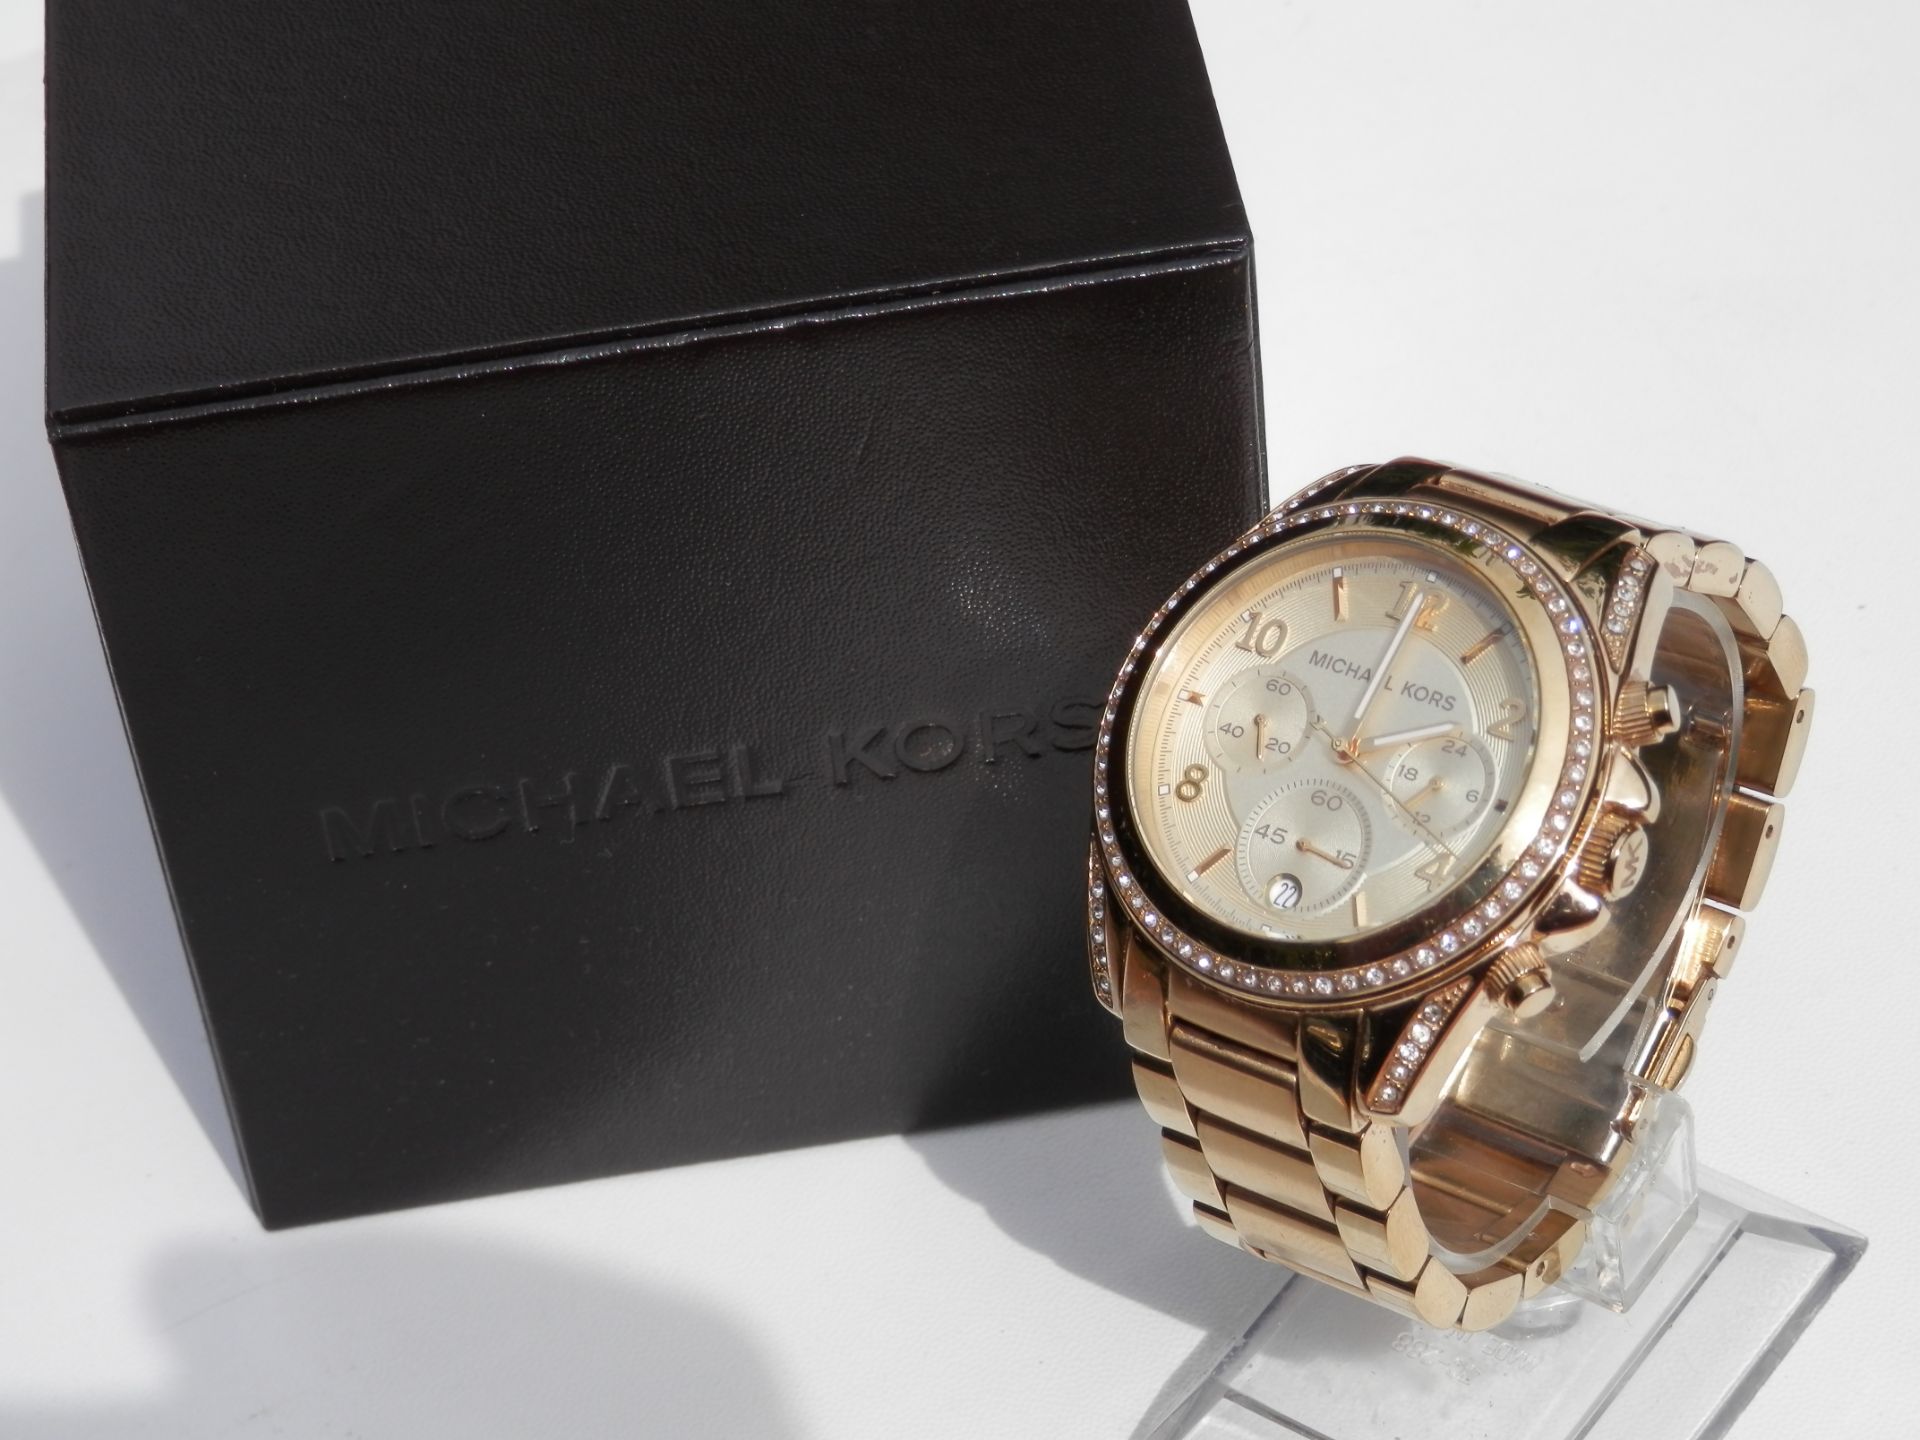 RRP £240. SUPERB LADIES MICHAEL KORS FULL STAINLESS GOLD PLATED DIAMANTE ENCRUSTED CHRONO DATE WATCH - Image 2 of 16